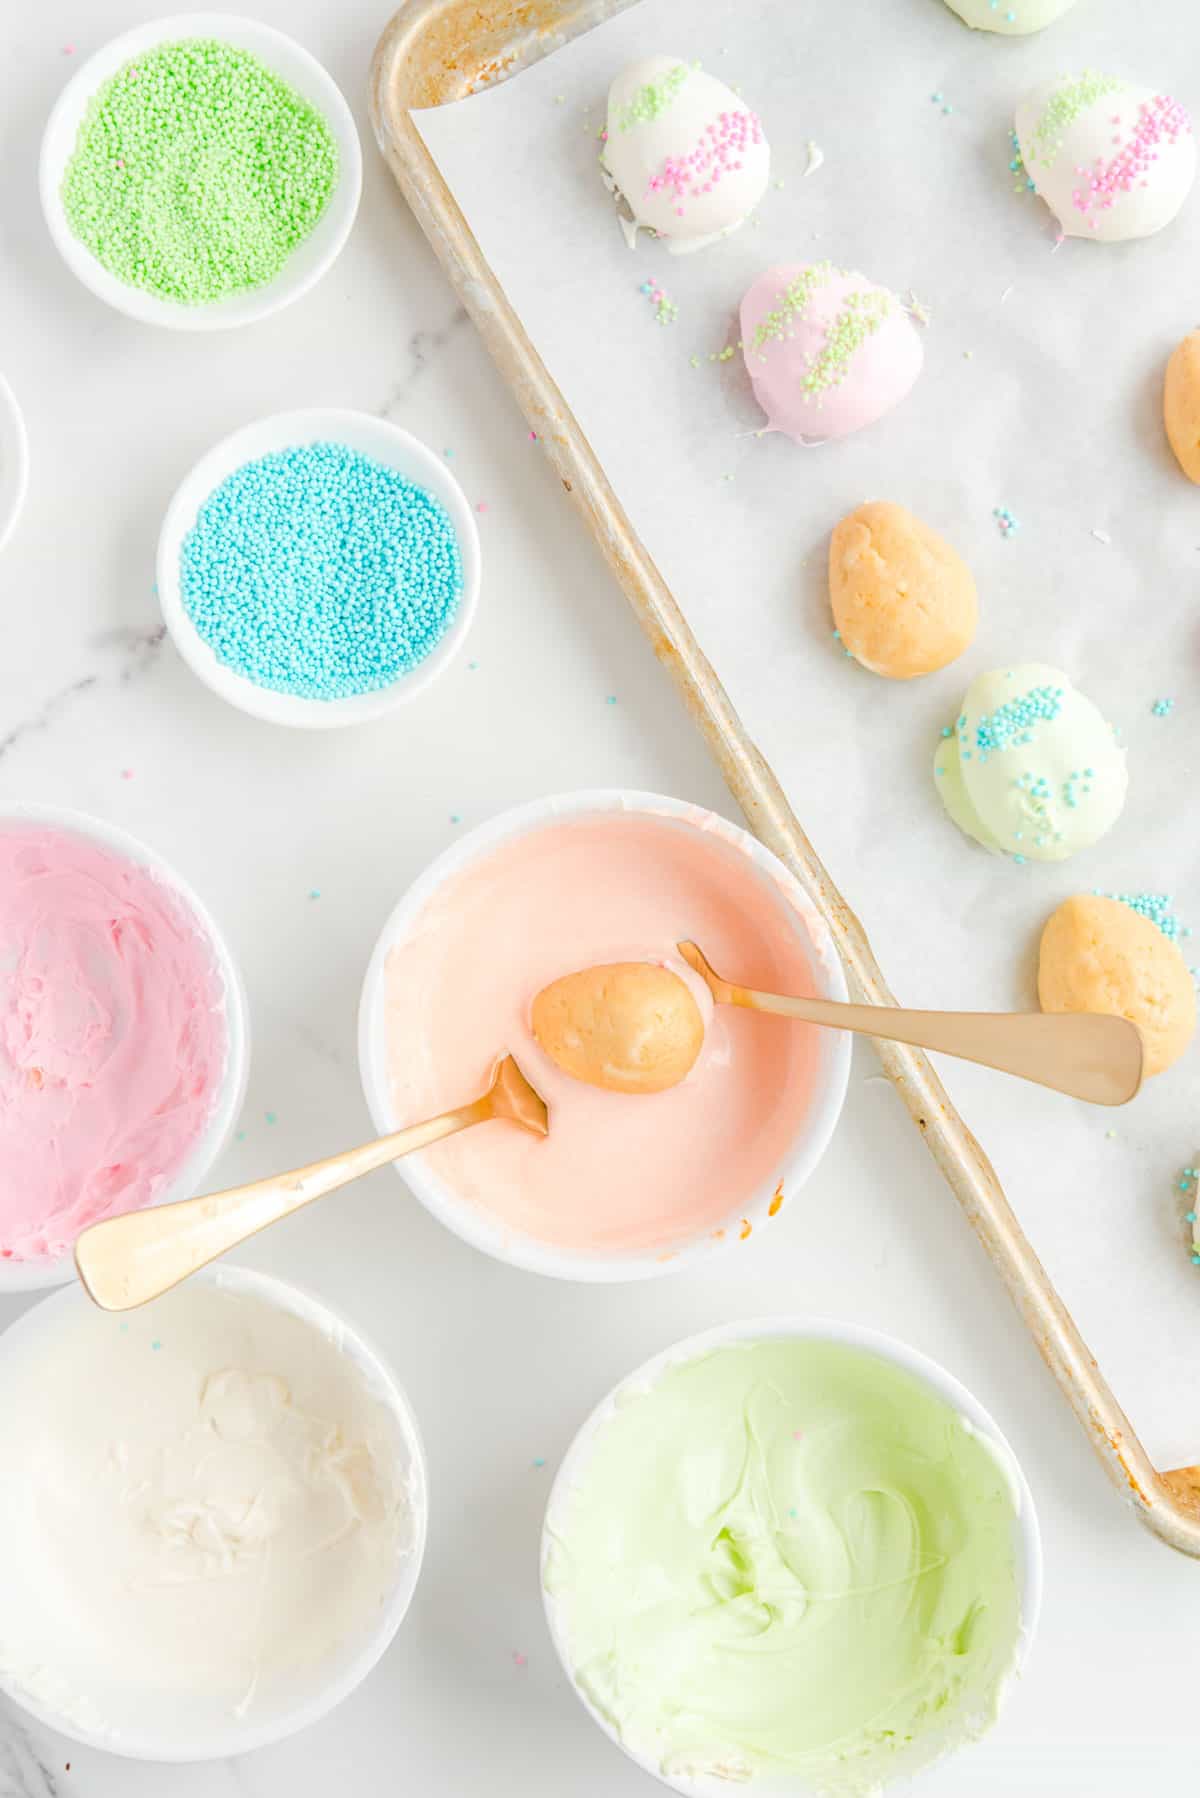 a baking sheet with some dipped and some non-dipped easter egg truffles beside bowls of blue and green sprinkles, and bowls of pink, light orange, light green and white chocolate, with one truffle being dipped with forks into the light orange chocolate.